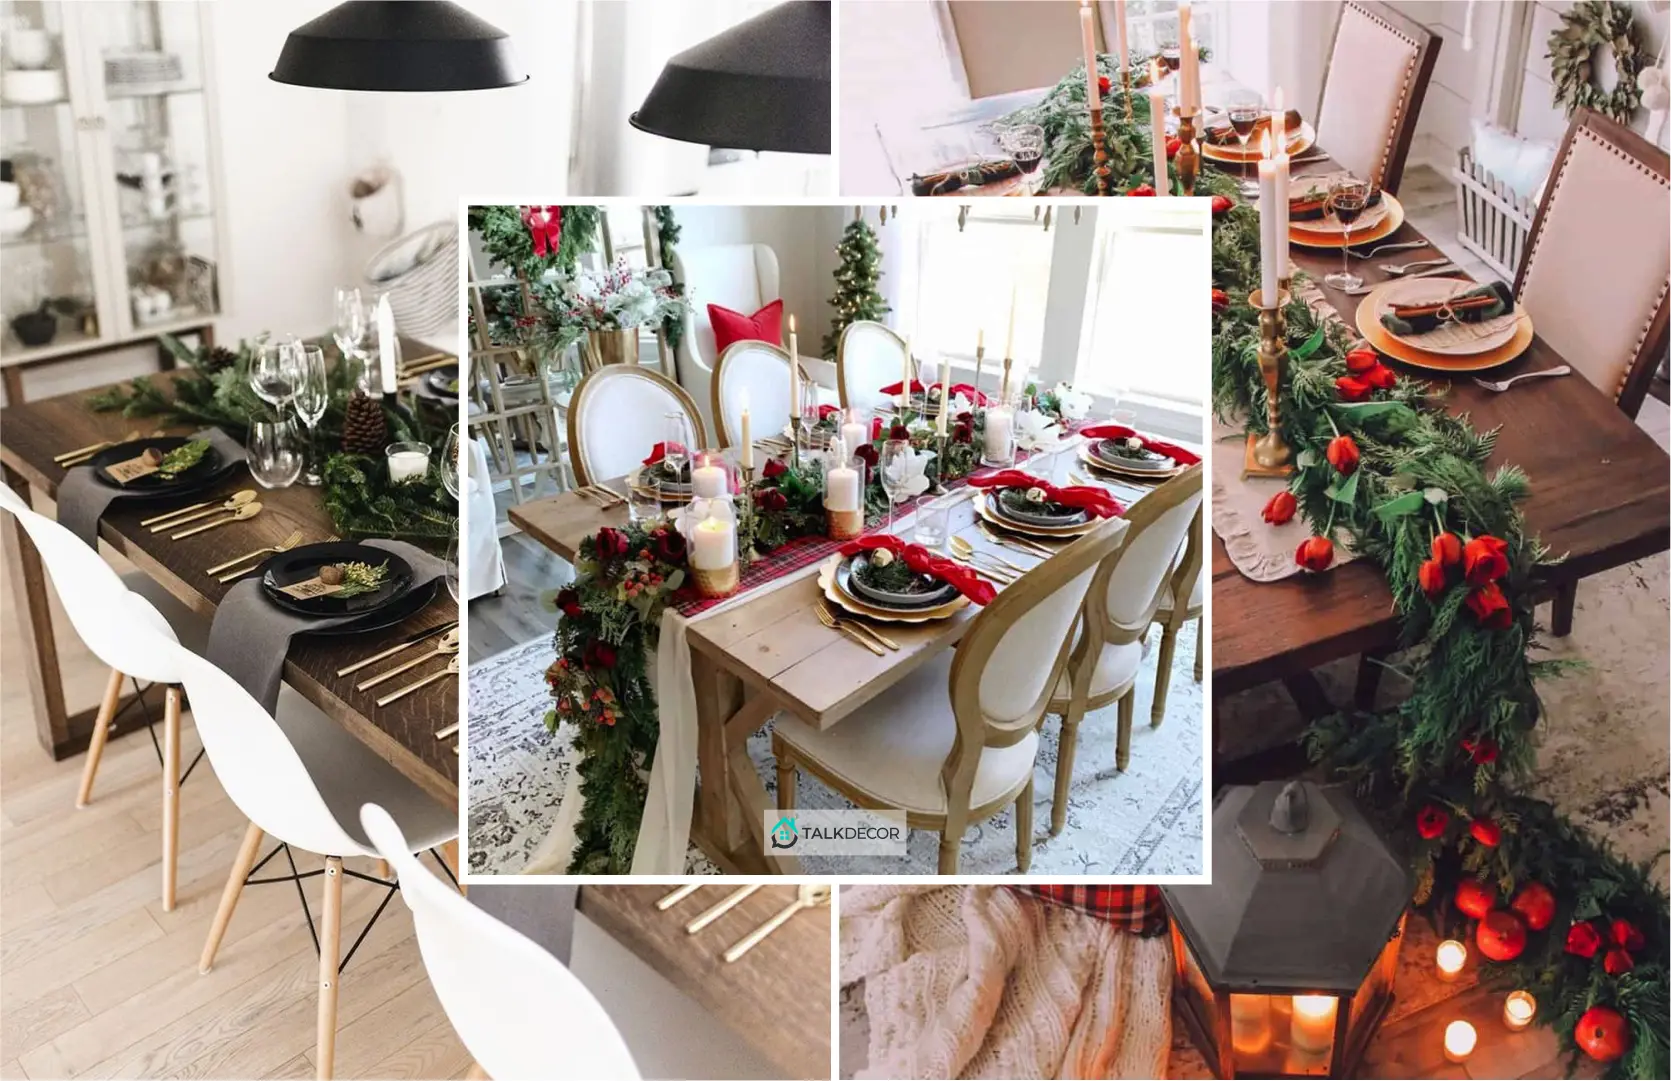 Provide Your Best Tablescape Decor for Your Christmas Dinner with These 60 Ideas